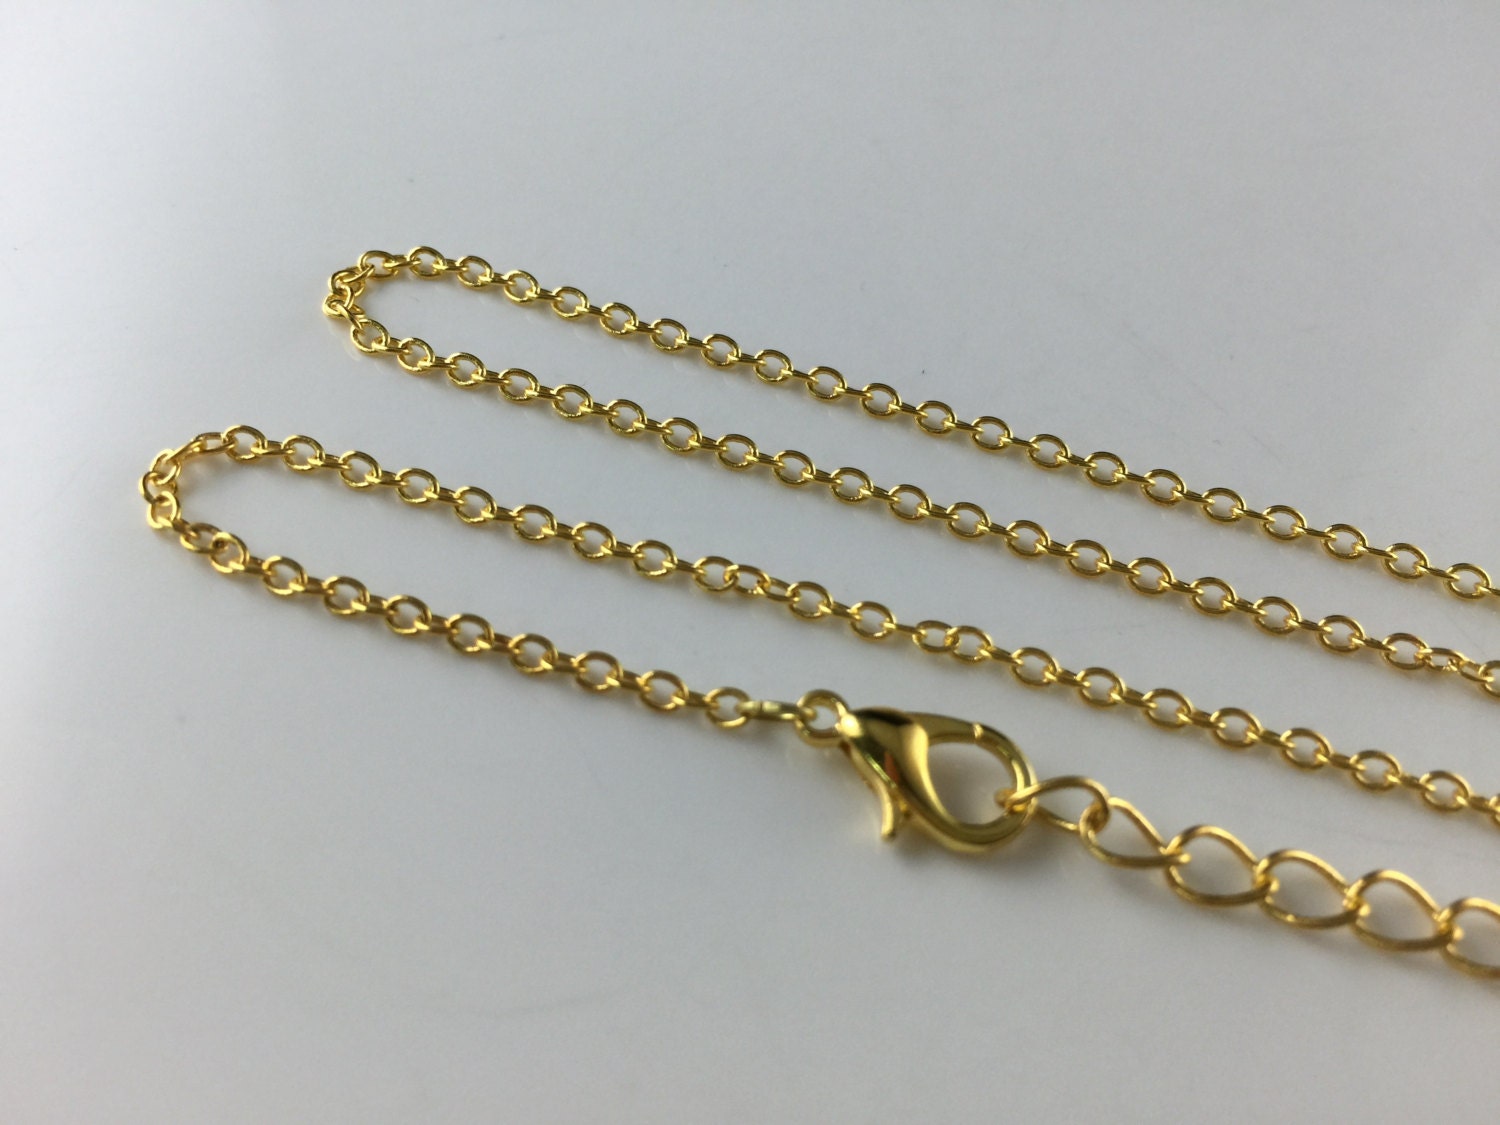 Gold Chain Necklace 2.5mm X 2mm Oval Links Chain Whole Sale - Etsy